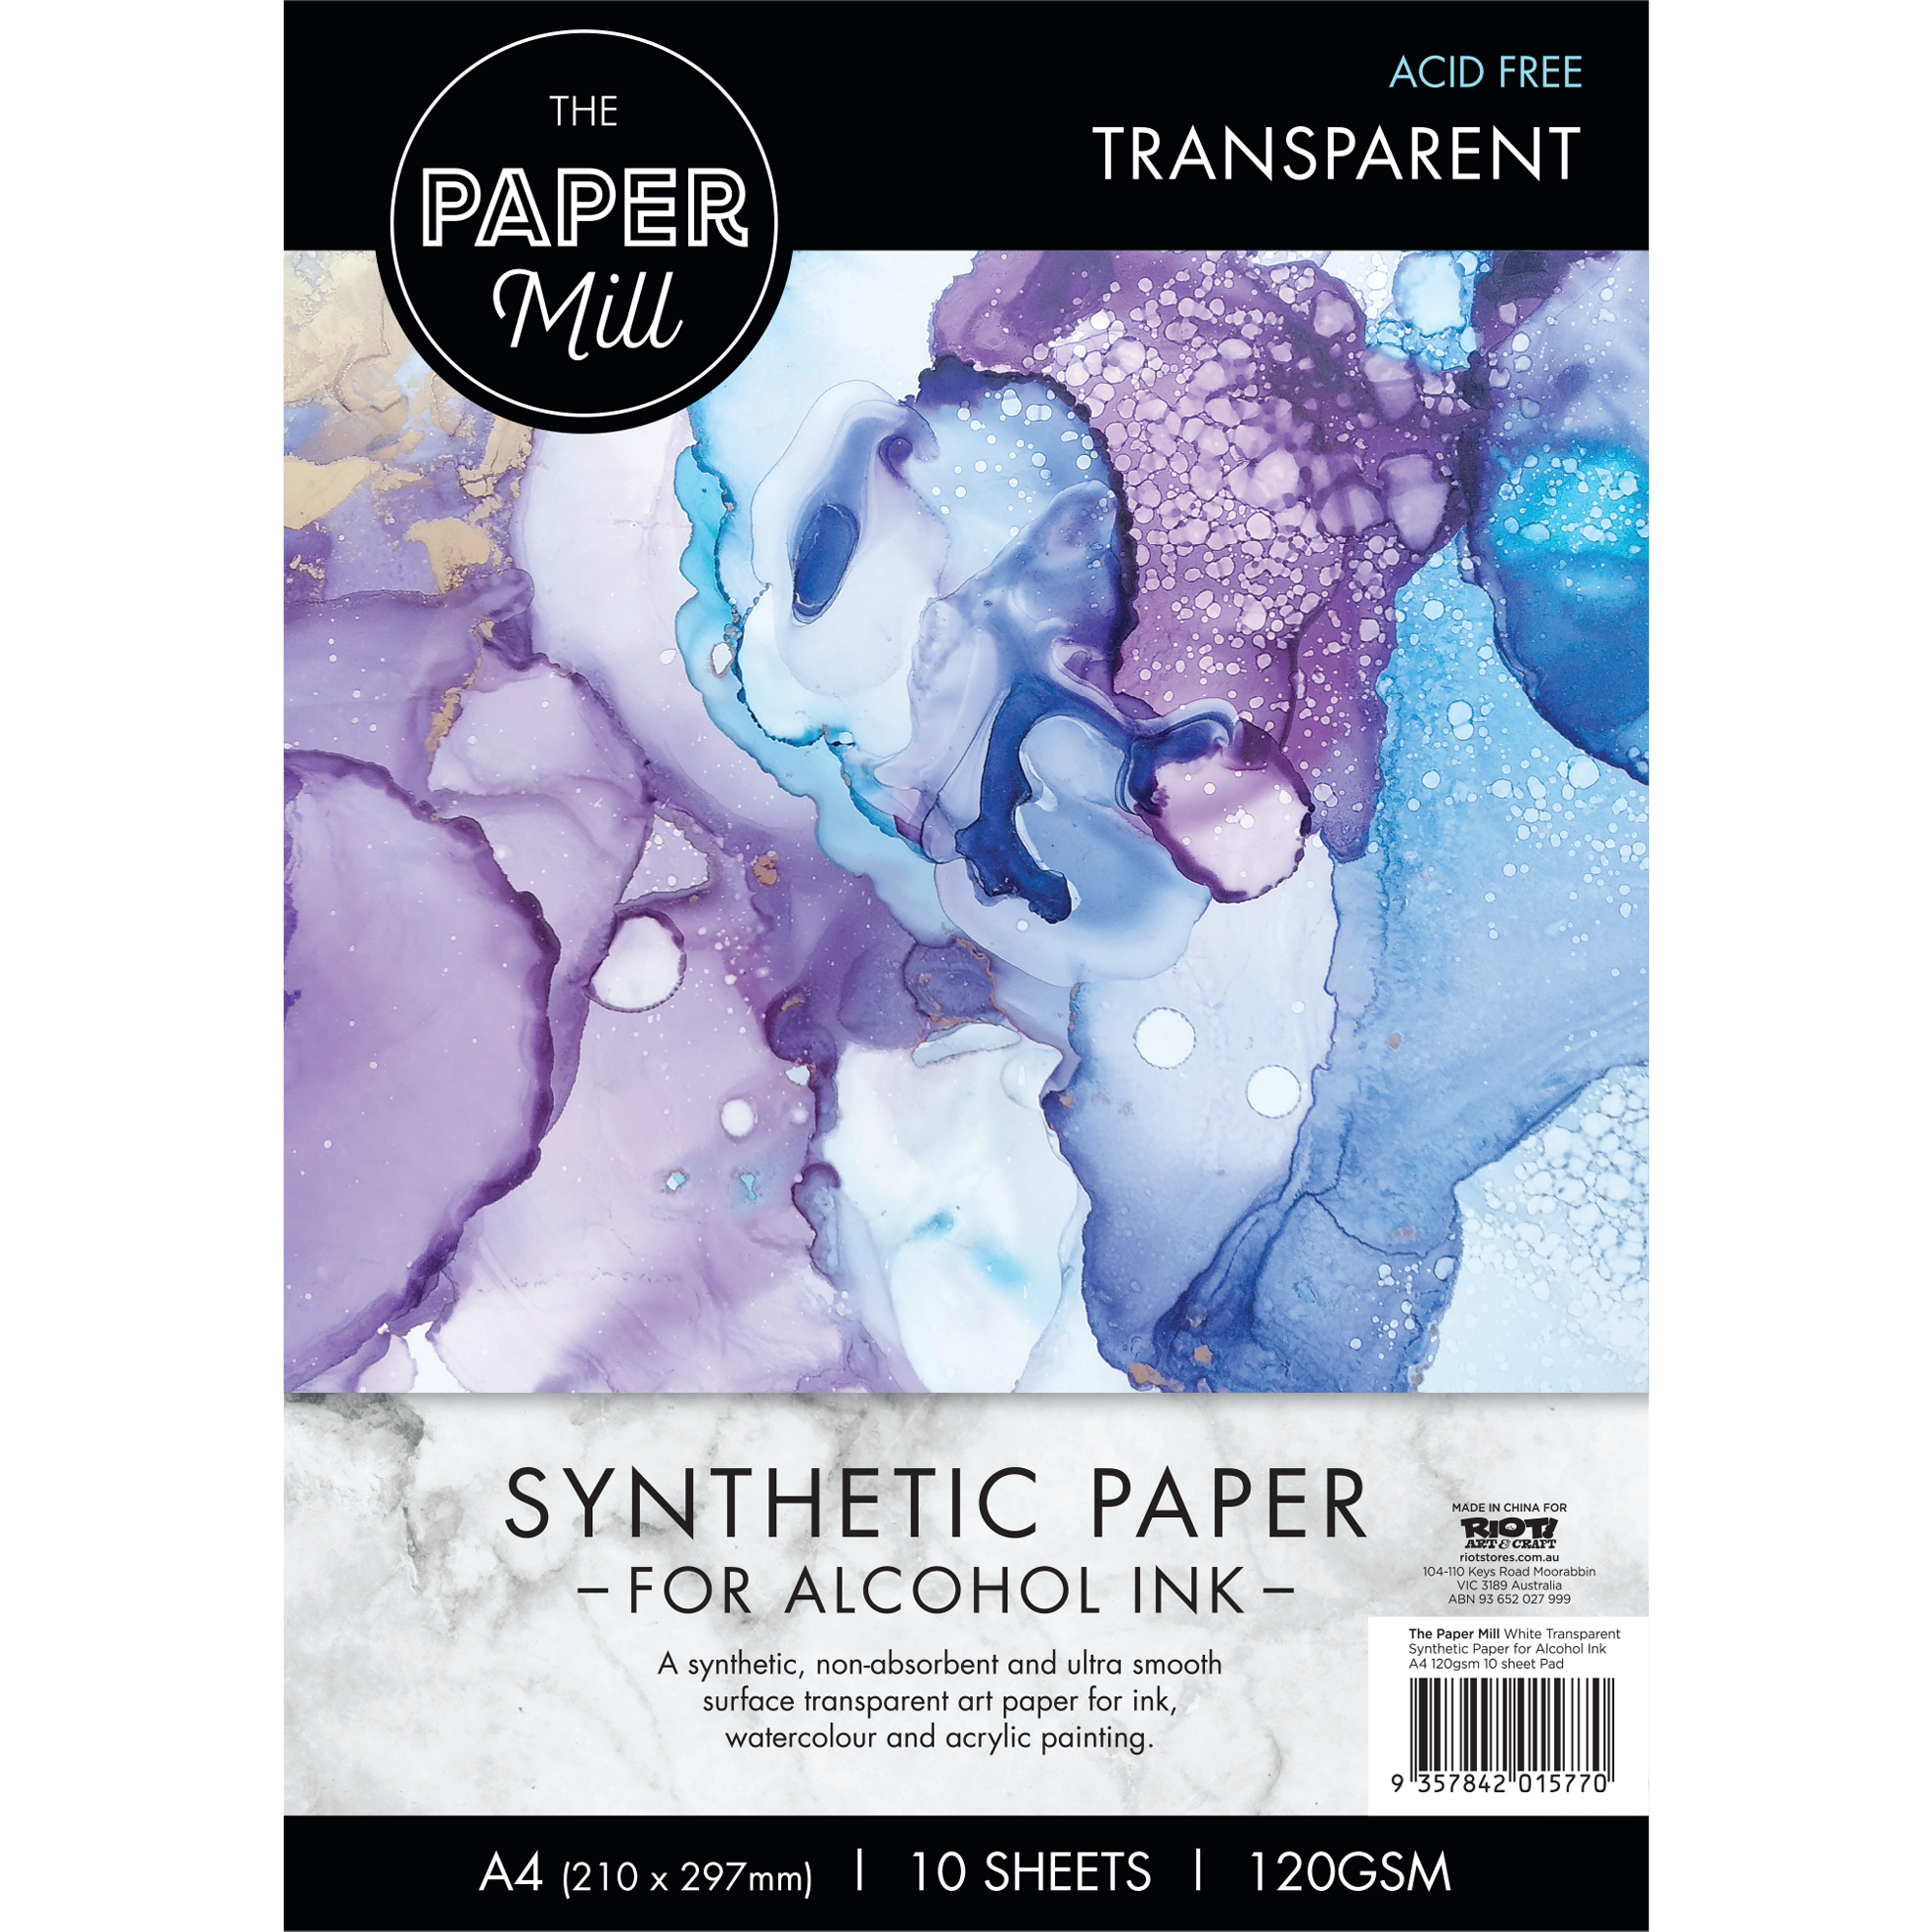 Image of The Paper Mill White Transparent Synthetic Paper Pad for Alcohol Ink-A4, 120gsm (10 Sheets)